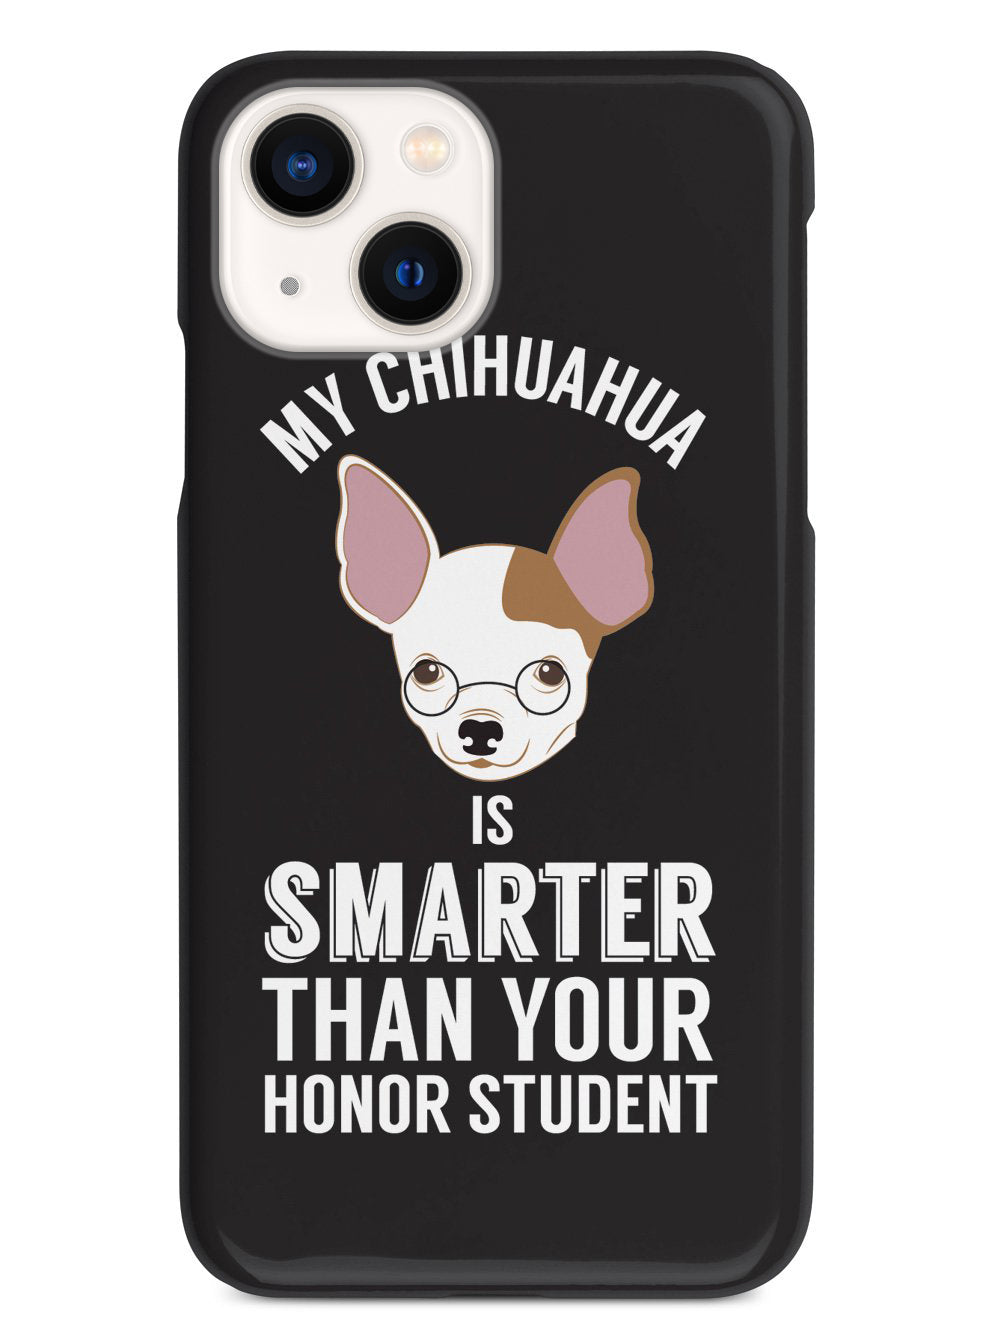 Smarter Than Your Honor Student - Chihuahua Case